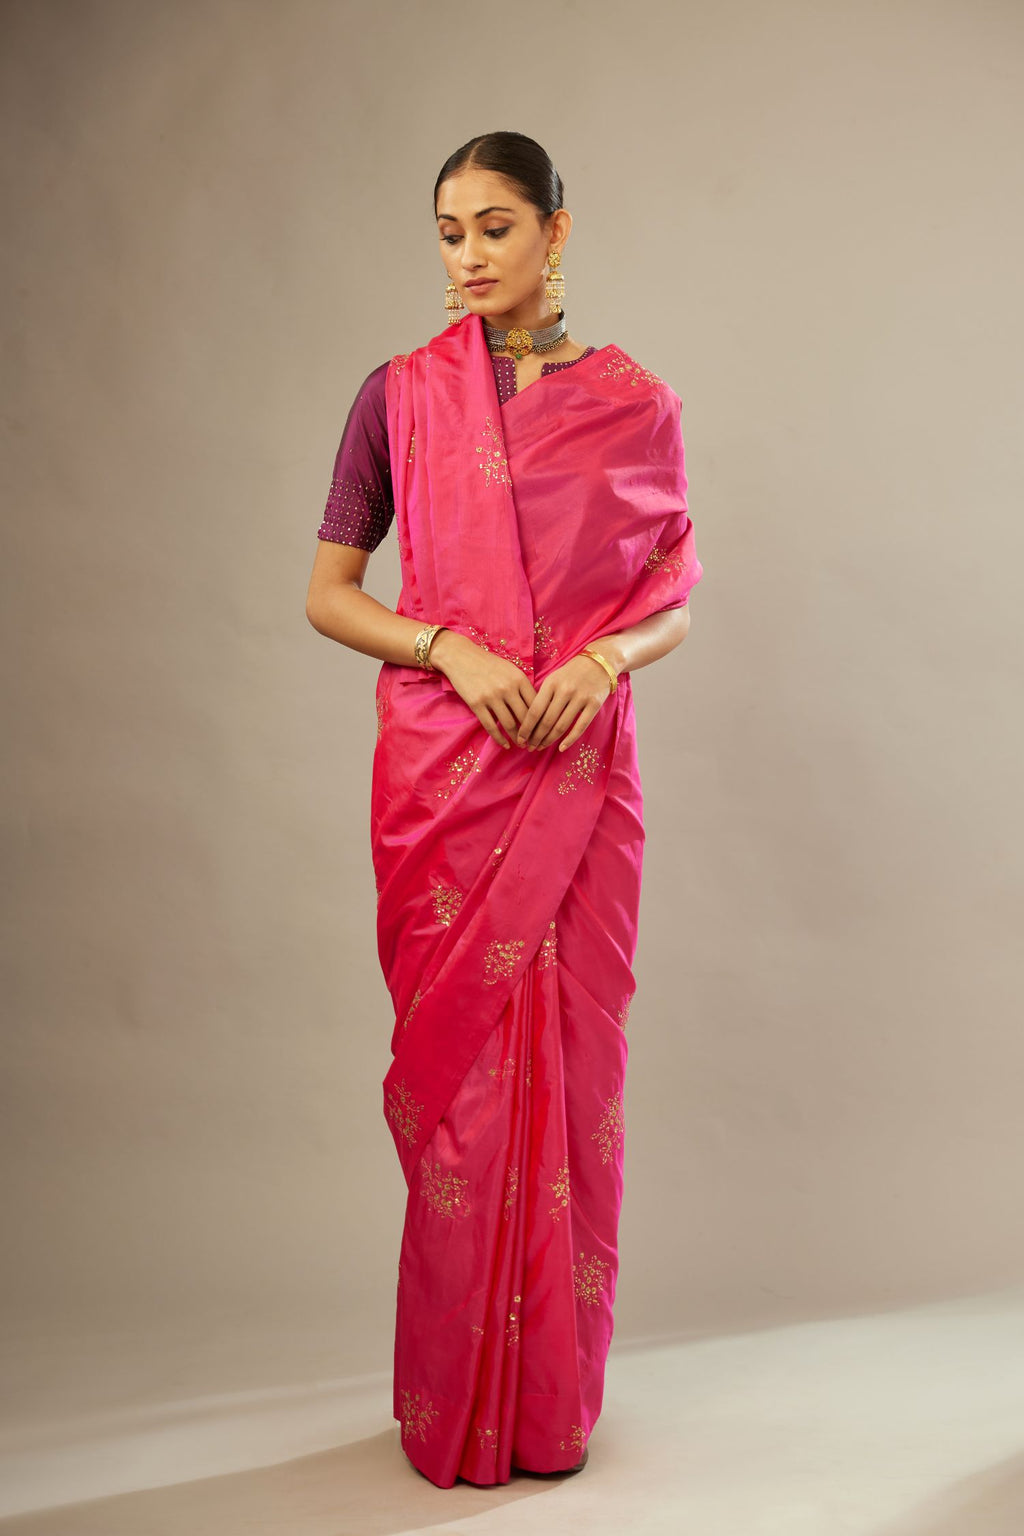 Raspberry silk saree set with hand embroidered delicate sequins floral butas all over.